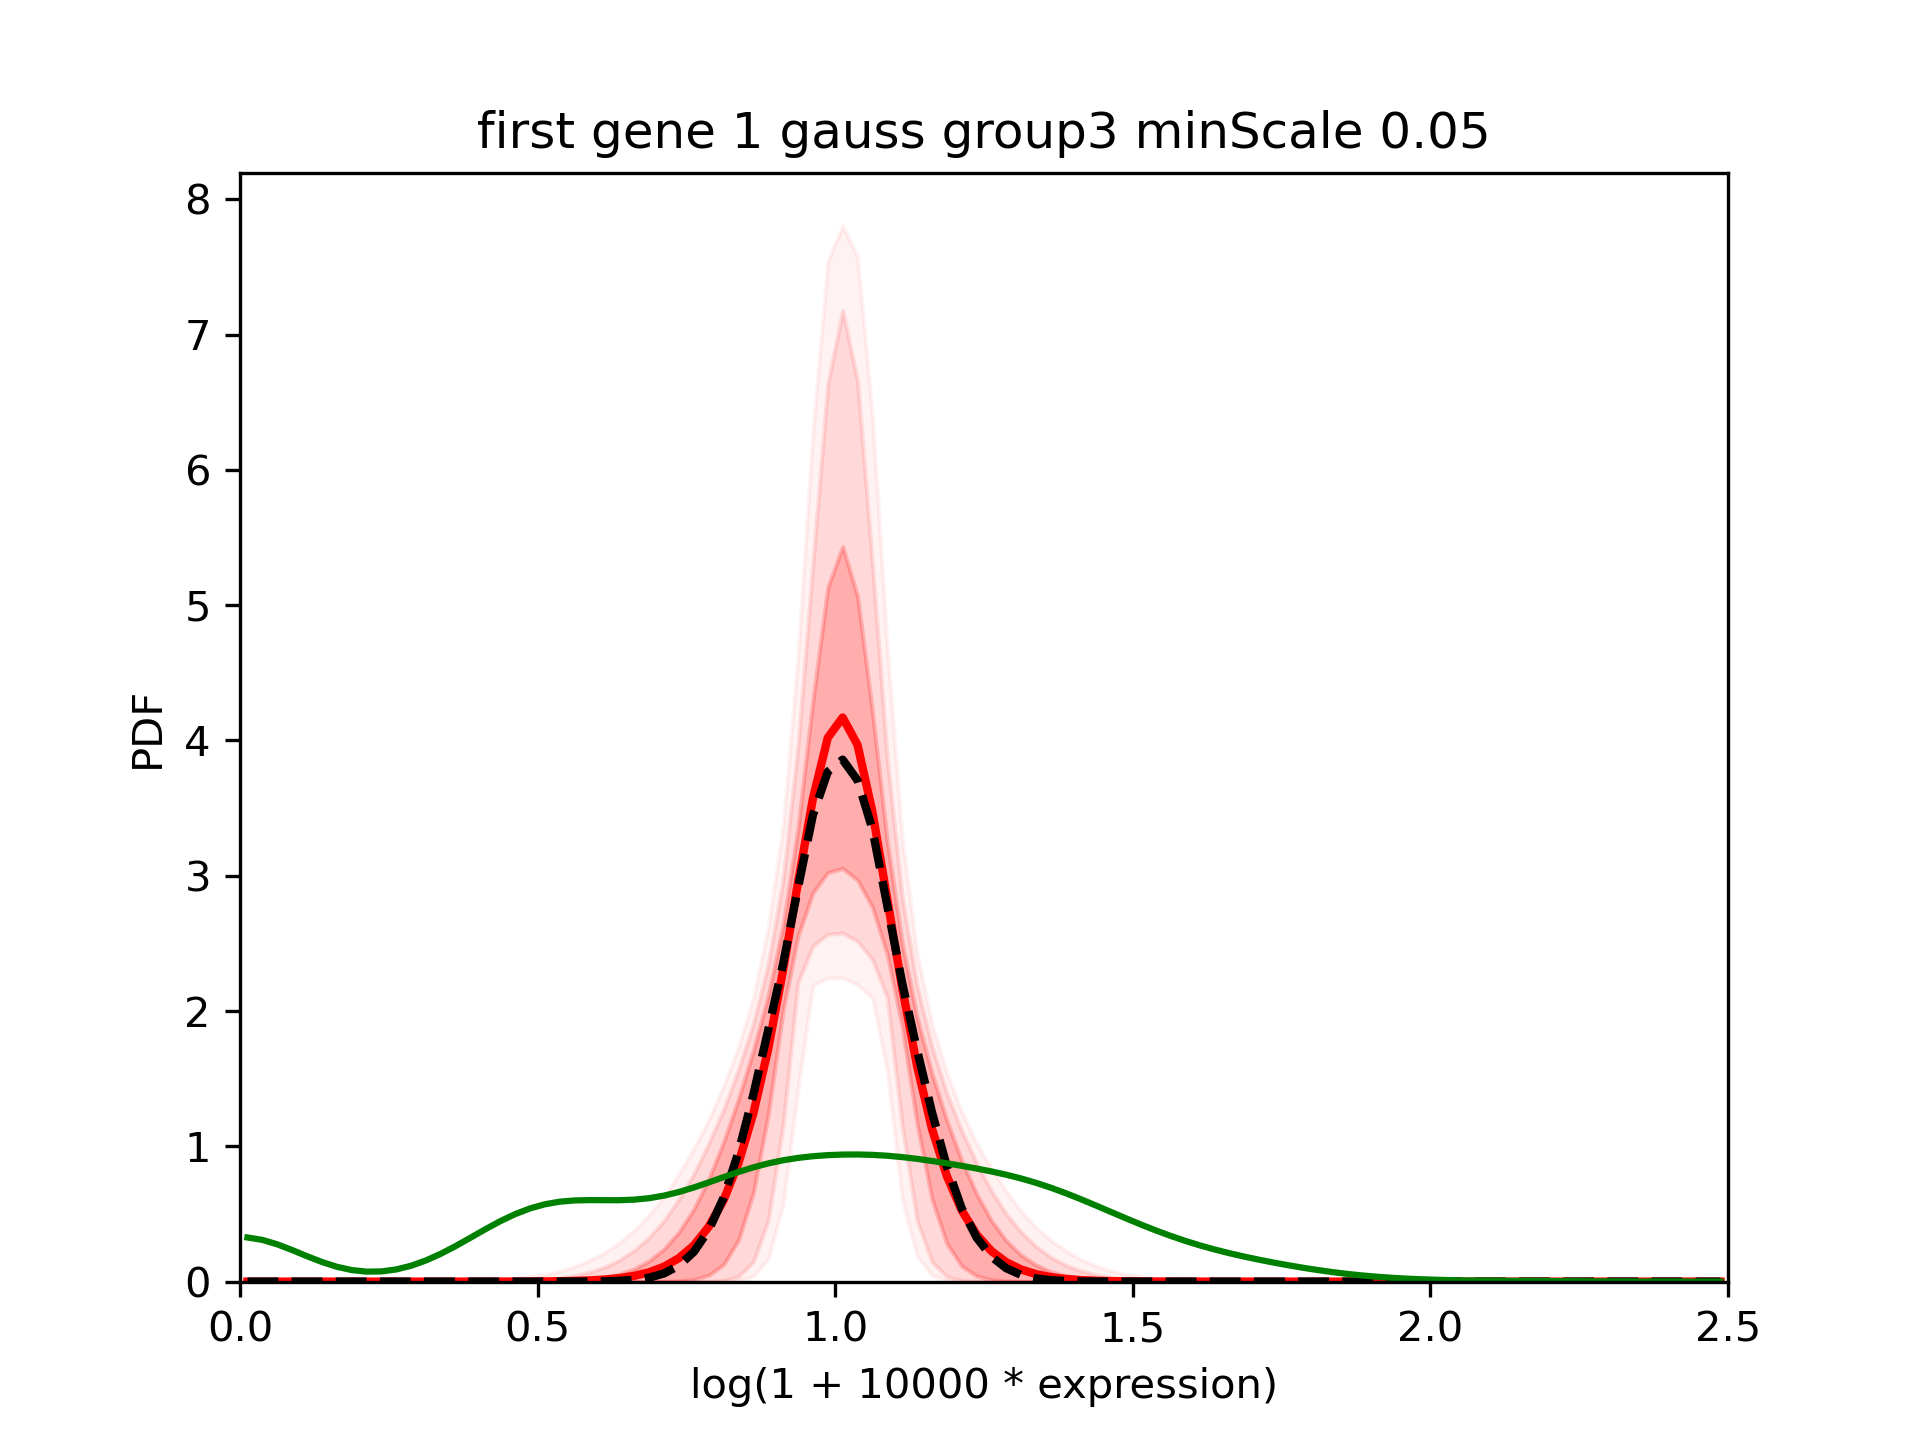 ../../_images/first_example_1d_group3_1gauss_ms0.05.png